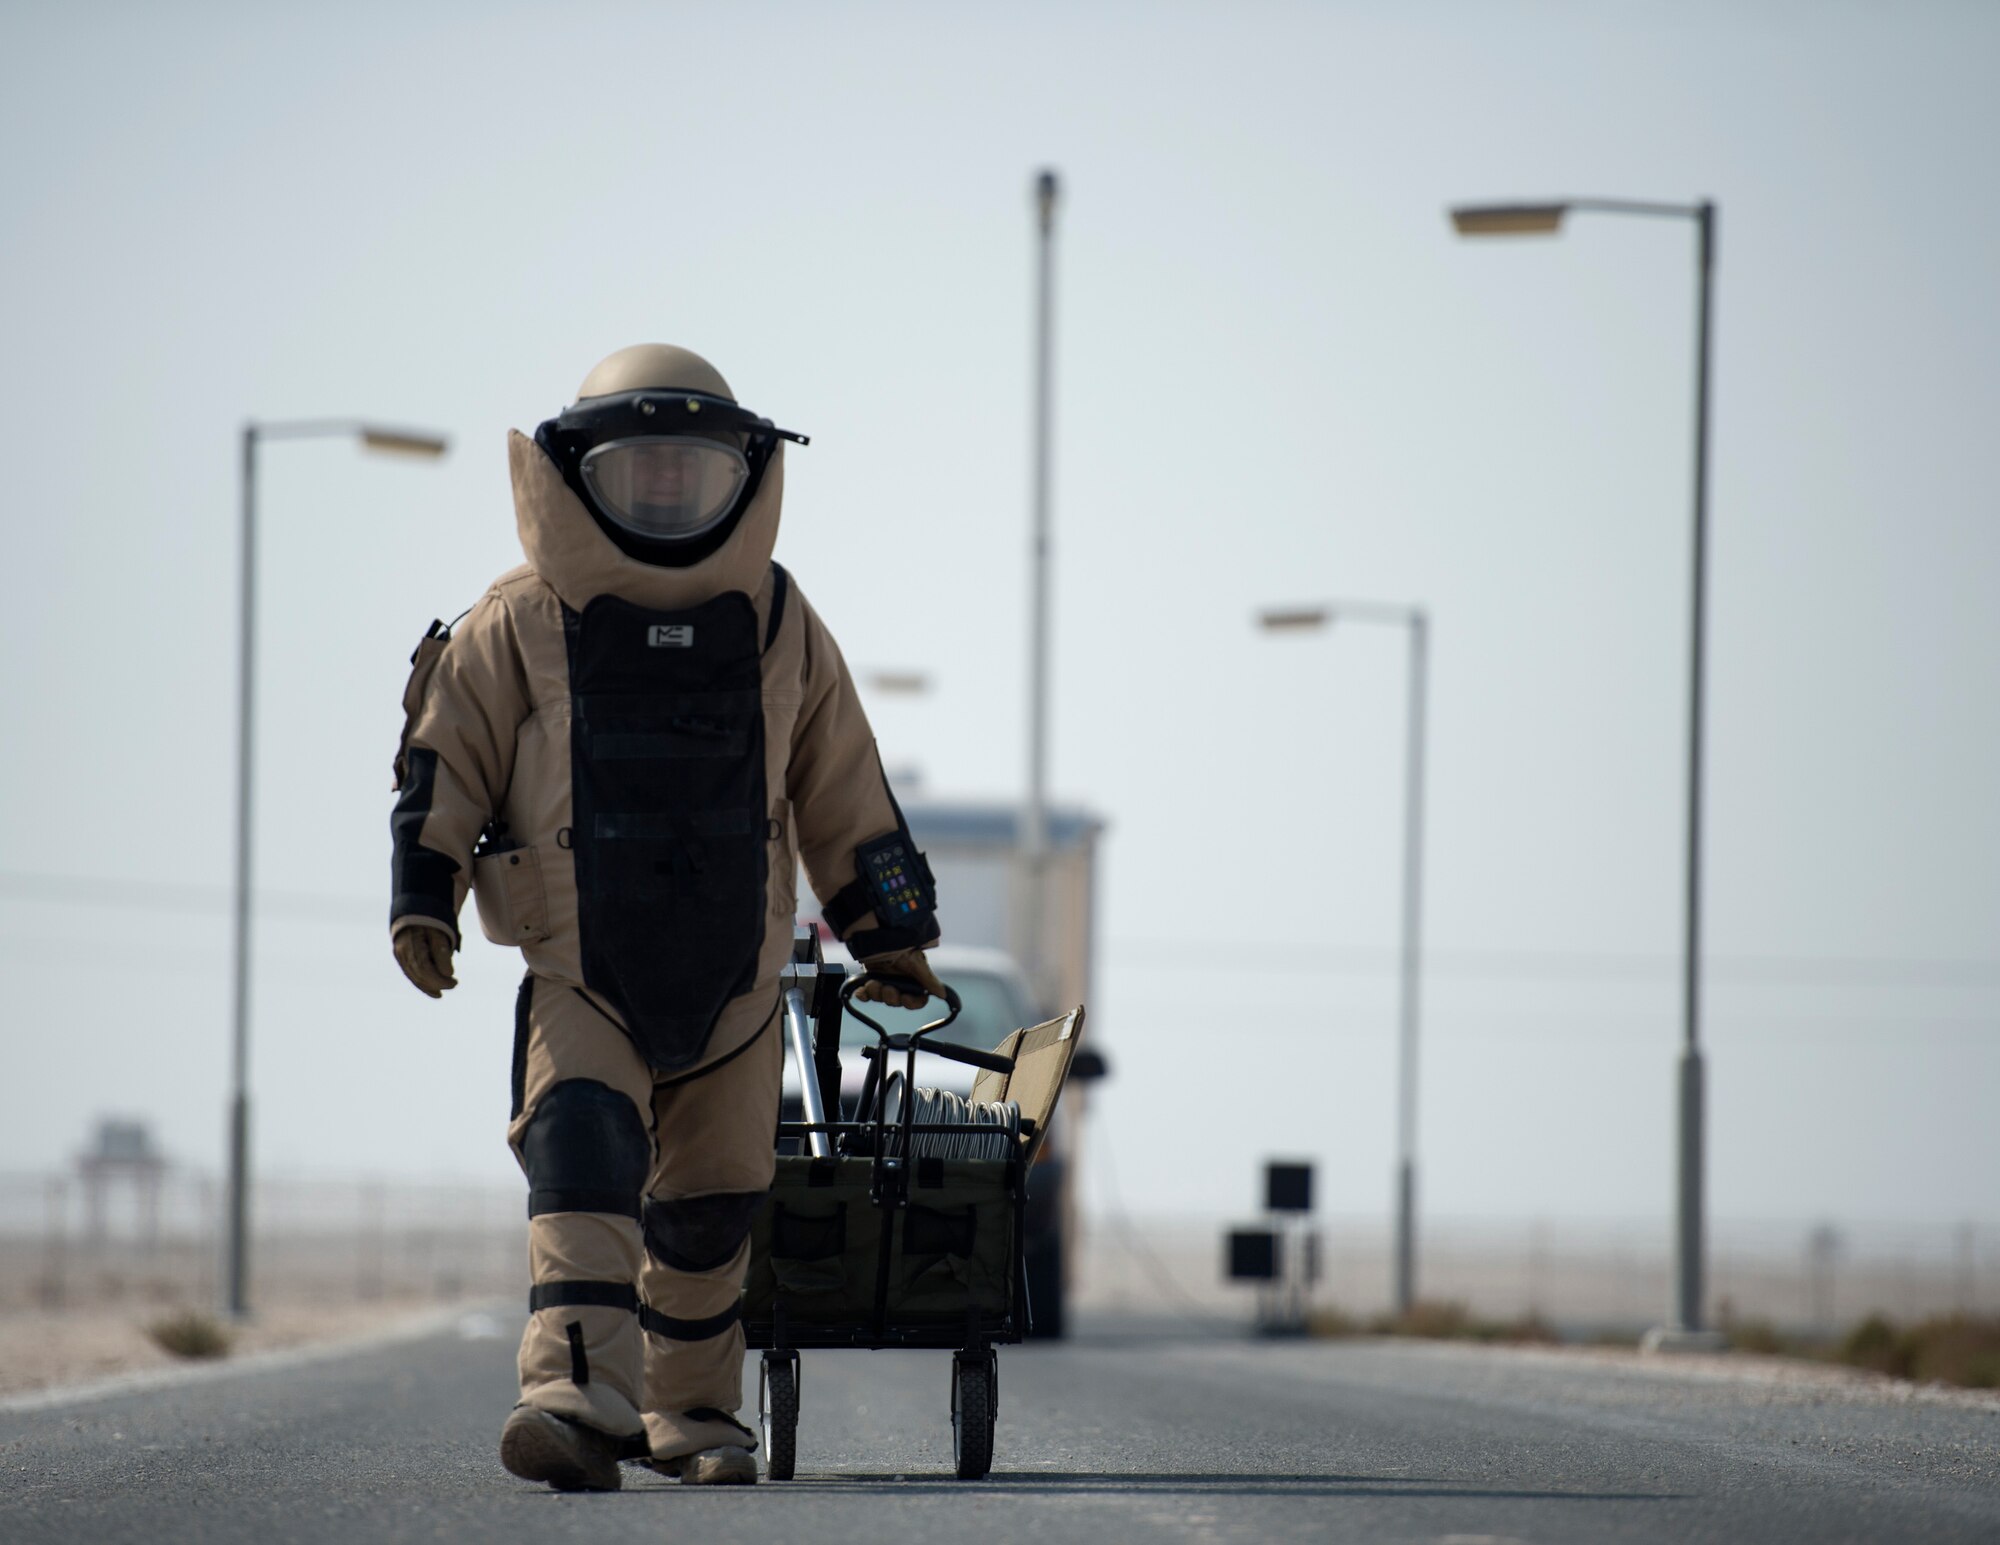 U.S. Air Force Staff Sgt. Brian Vosper, team leader with the 379th Expeditionary Civil Engineer Squadron Explosive Ordnance Disposal Flight, walks to the vehicle search exercise location at Al Udeid Air Base, Qatar, Aug. 26, 2017.